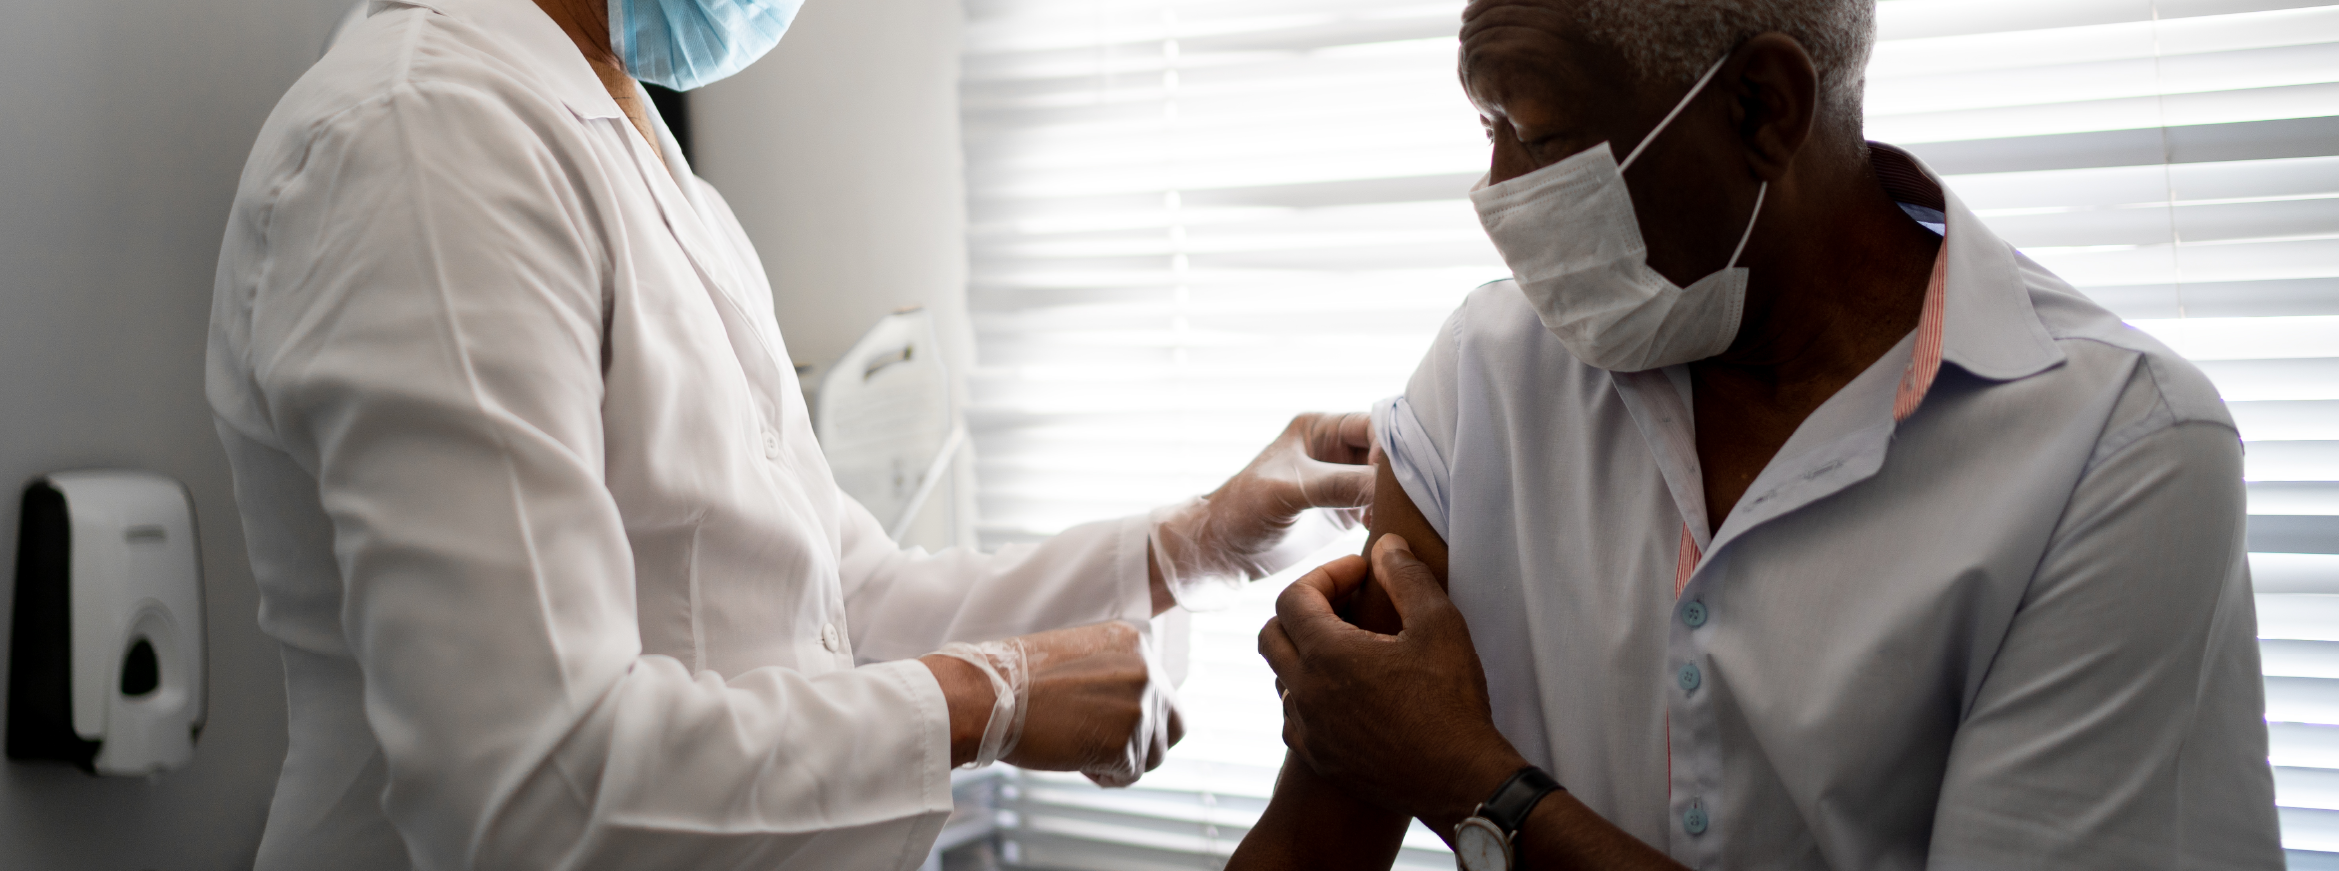 Medical professional administers vaccine to a patient, both wearing masks.